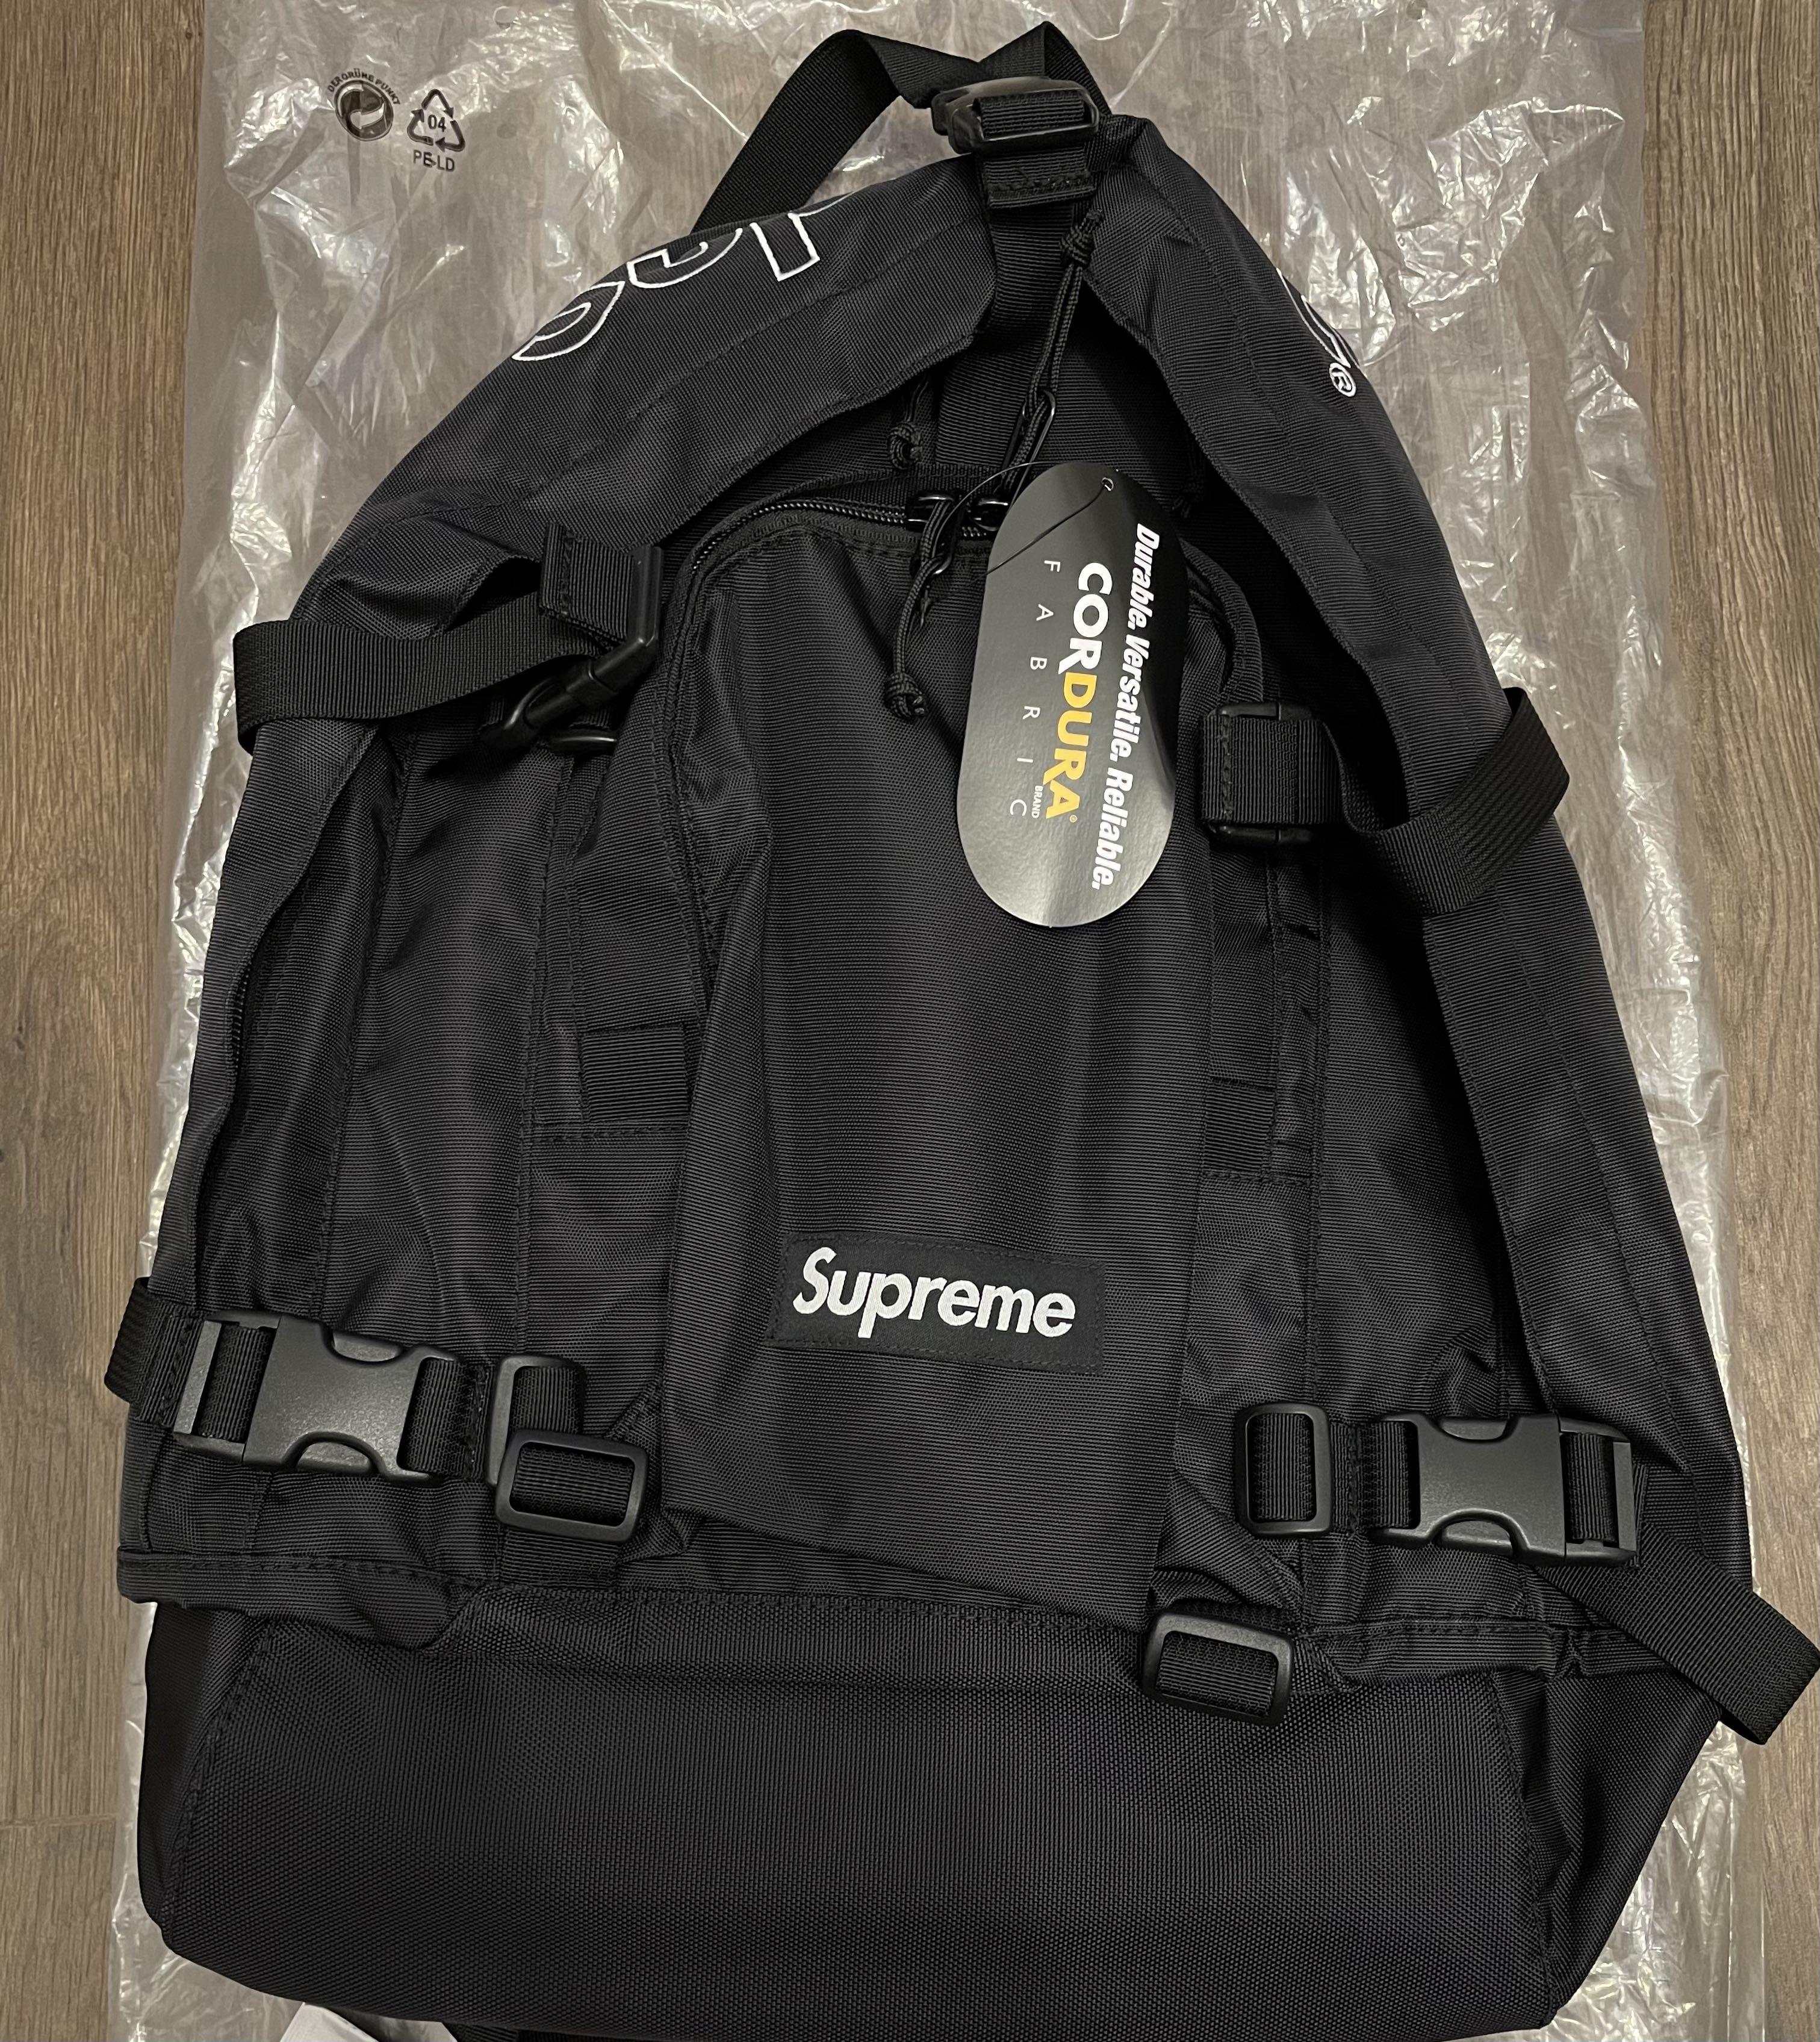 SUPREME FW19 BACKPACK REVIEW 